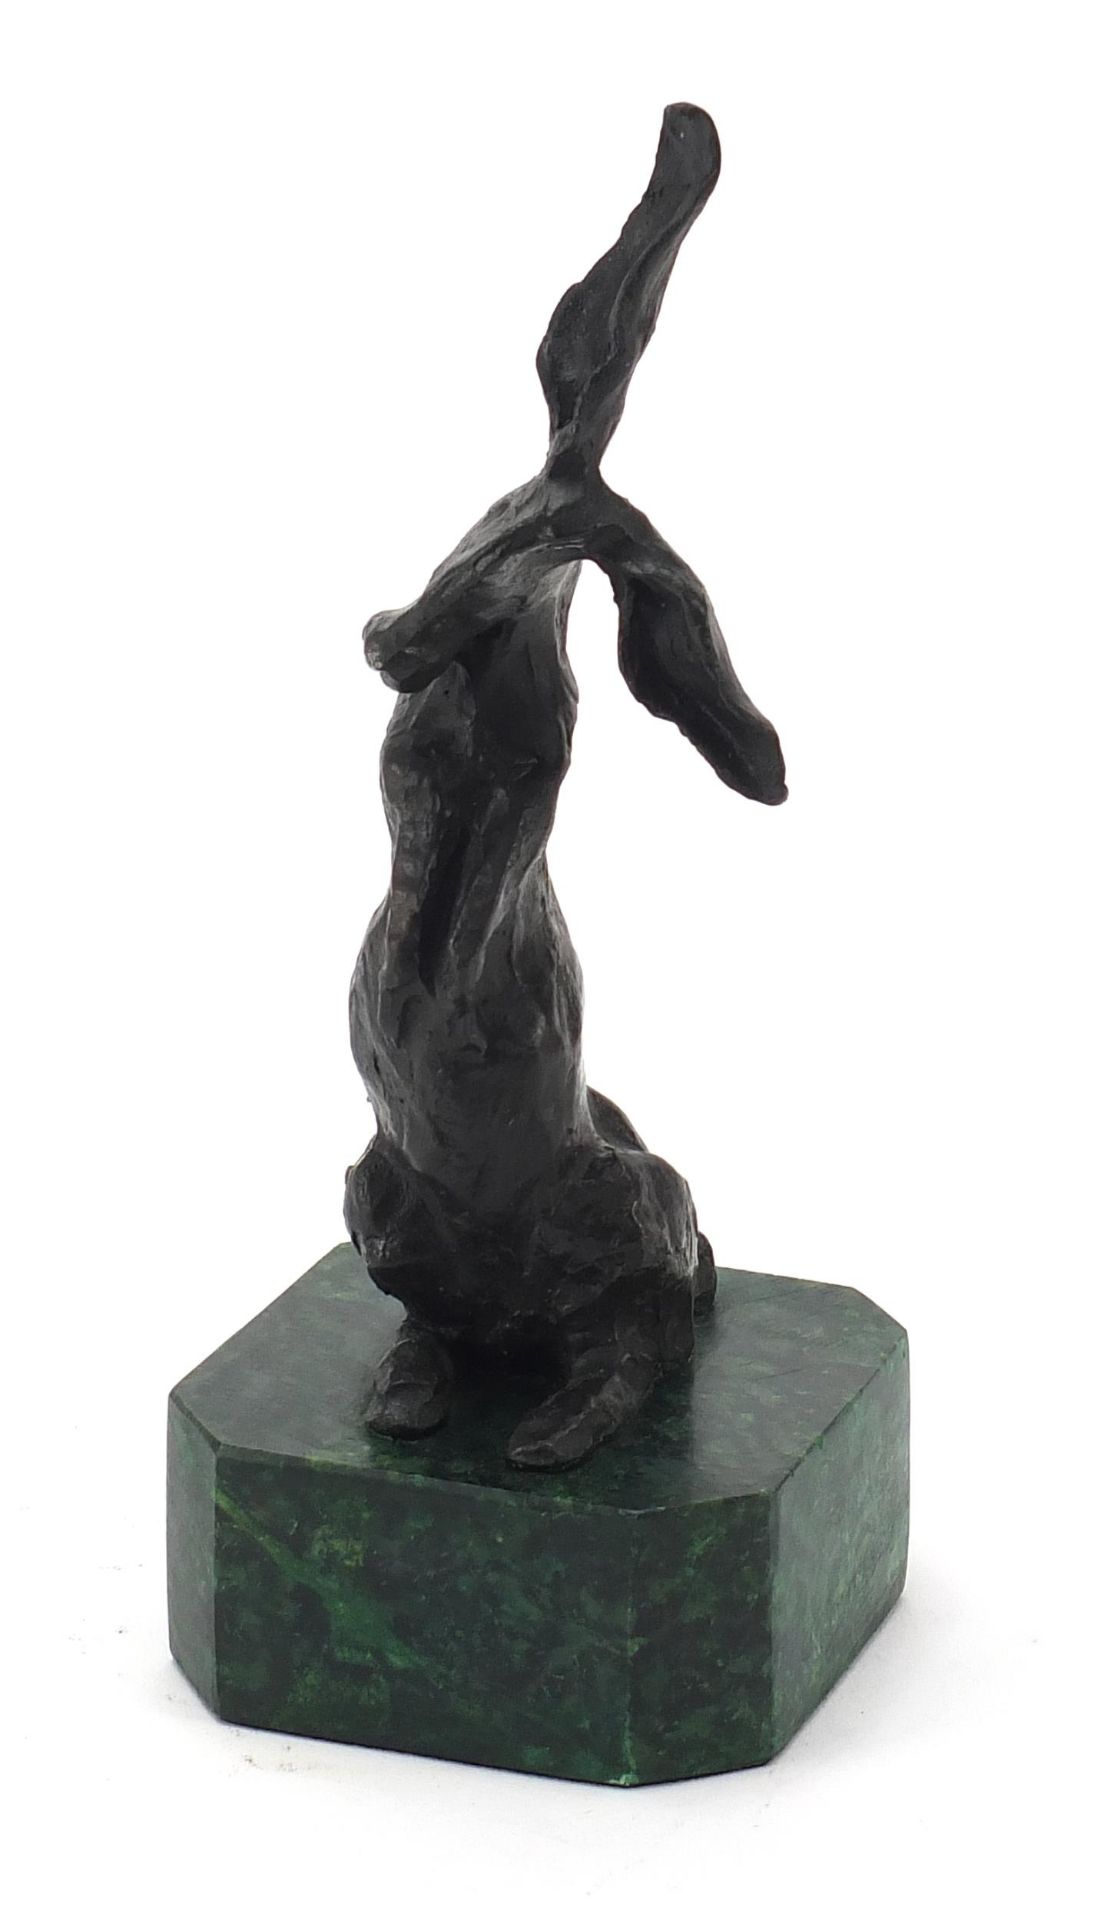 Mid century design patinated bronze sculpture of a seated rabbit raised on a green marbleised